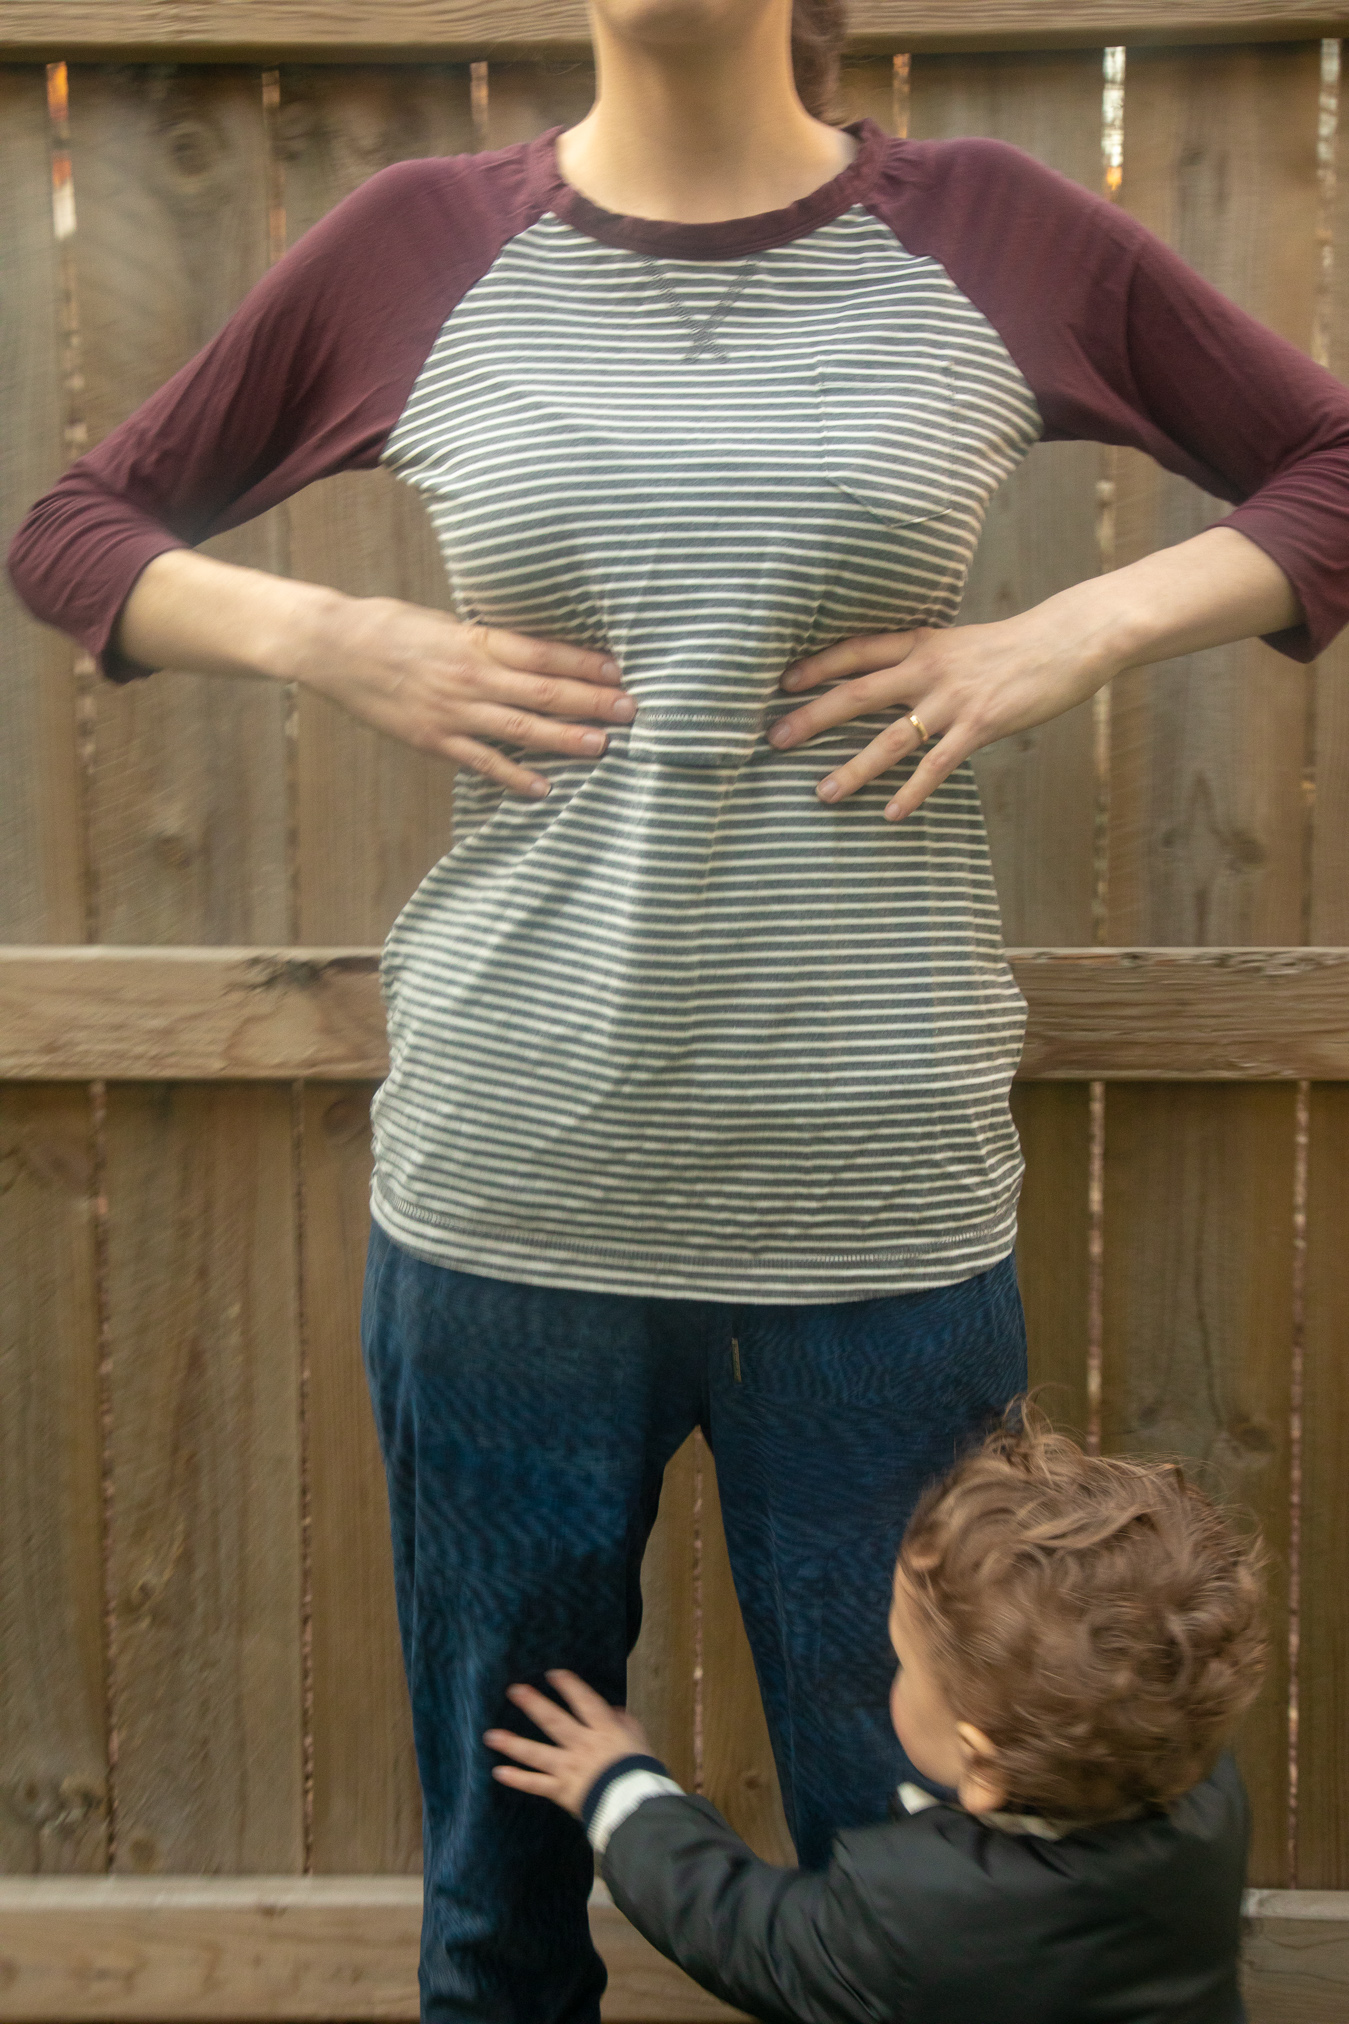 Is Your Bra Too Tight? — Poised & Powerful Parenthood